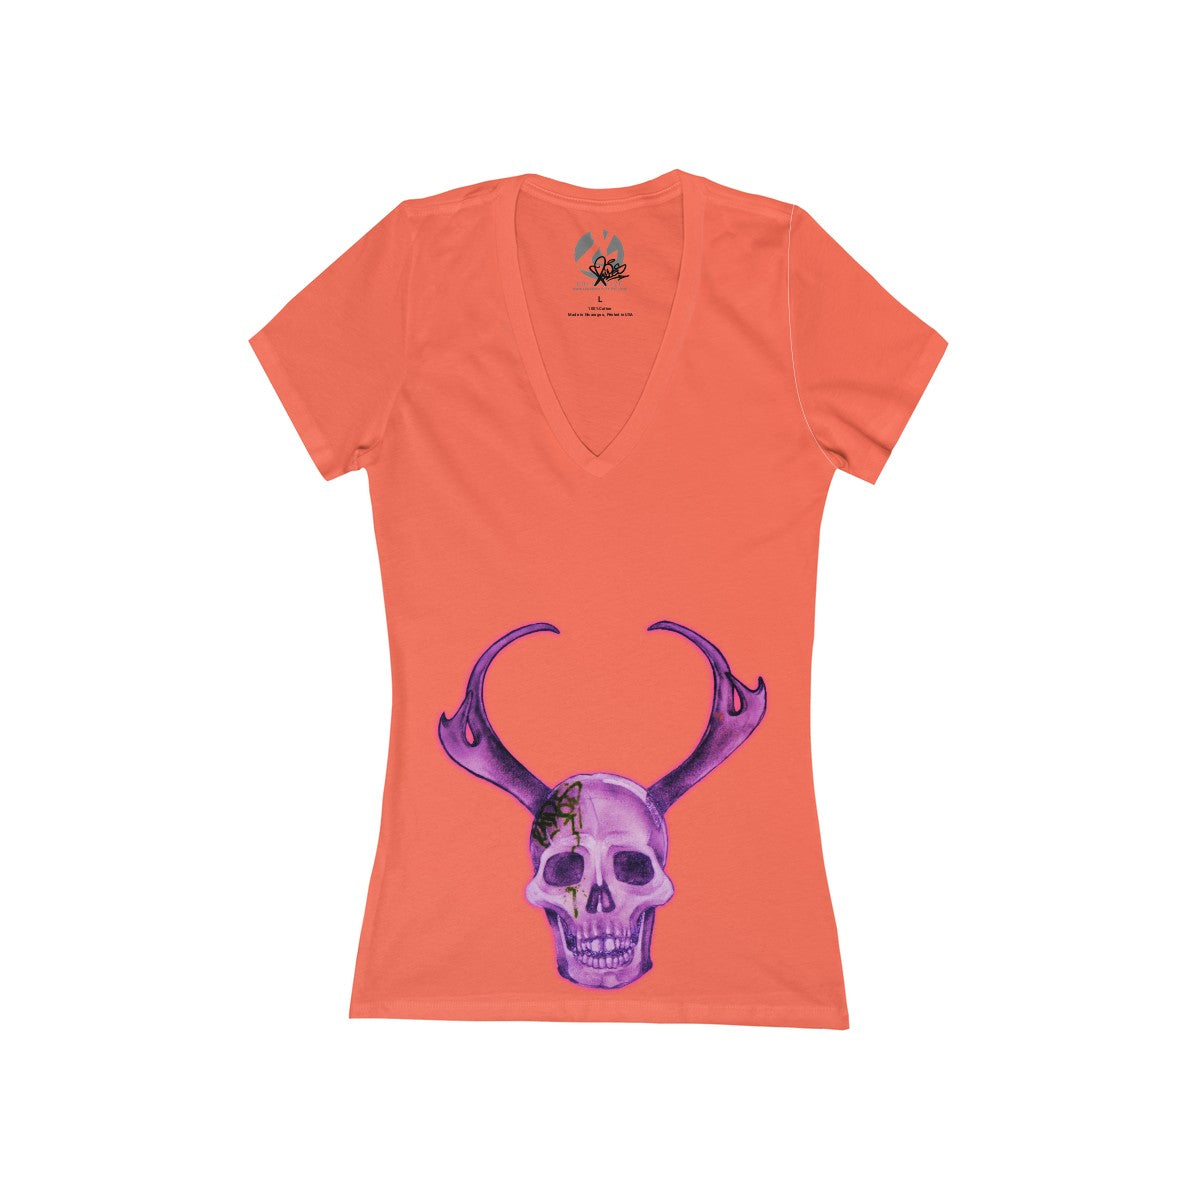 "Purple Skull" Women's Jersey Short Sleeve Deep V-Neck Tee by Ripes - GaleraCollective